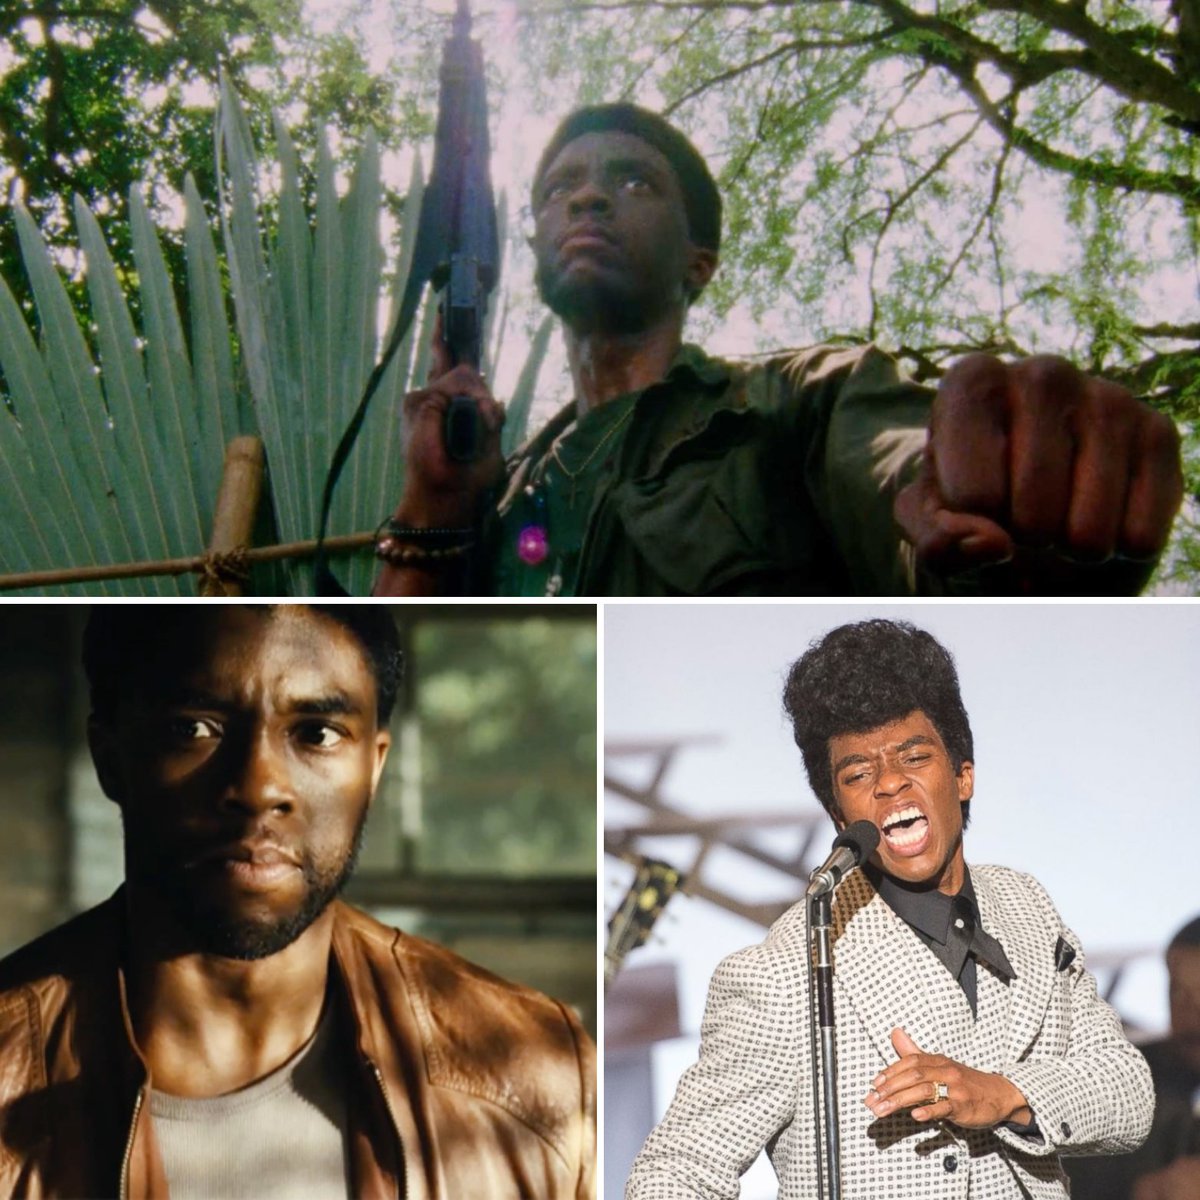 Many of his great performances including Spike Lee's acclaimed 'Da 5 Bloods' (2020) and his incredible role as James Brown in 'Get On Up' (2014) and 'Message from the King' (2016) are on  @NetflixUK